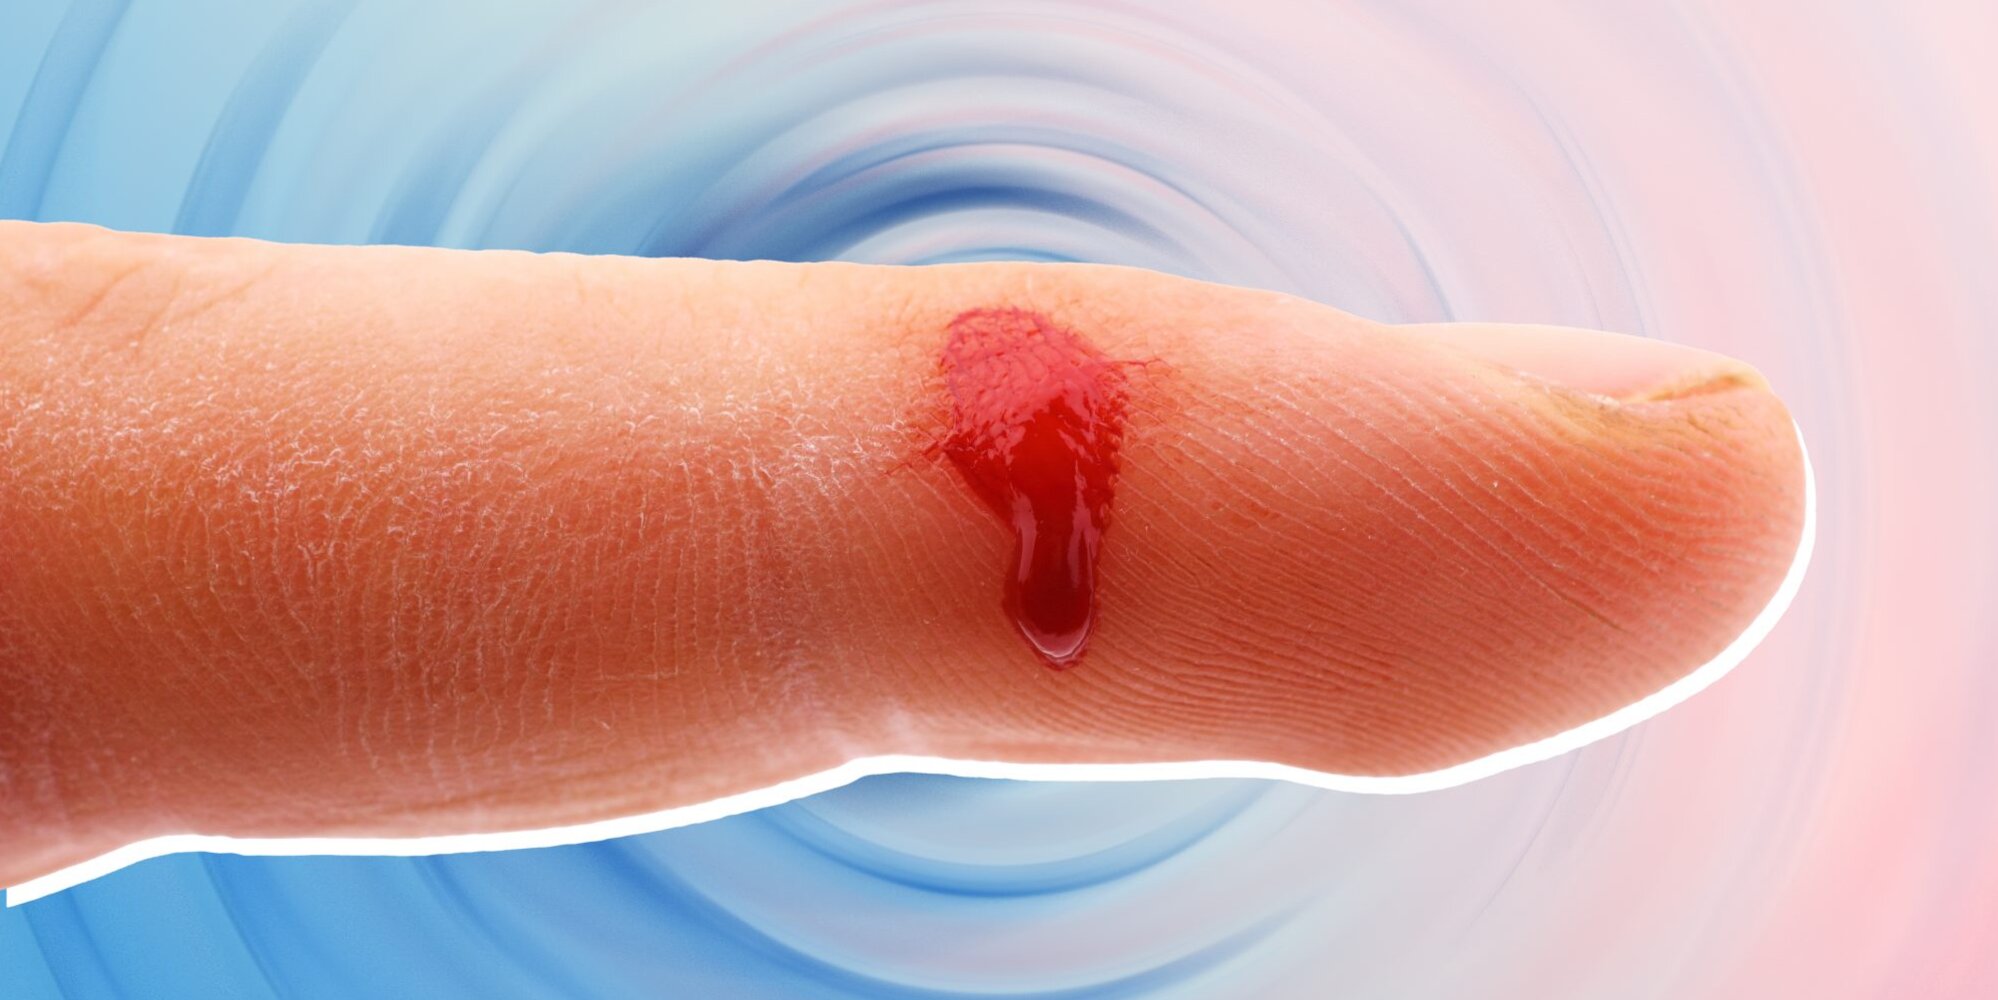 Here's How to Tell if You Have an Infected Cut-And What to Do About It